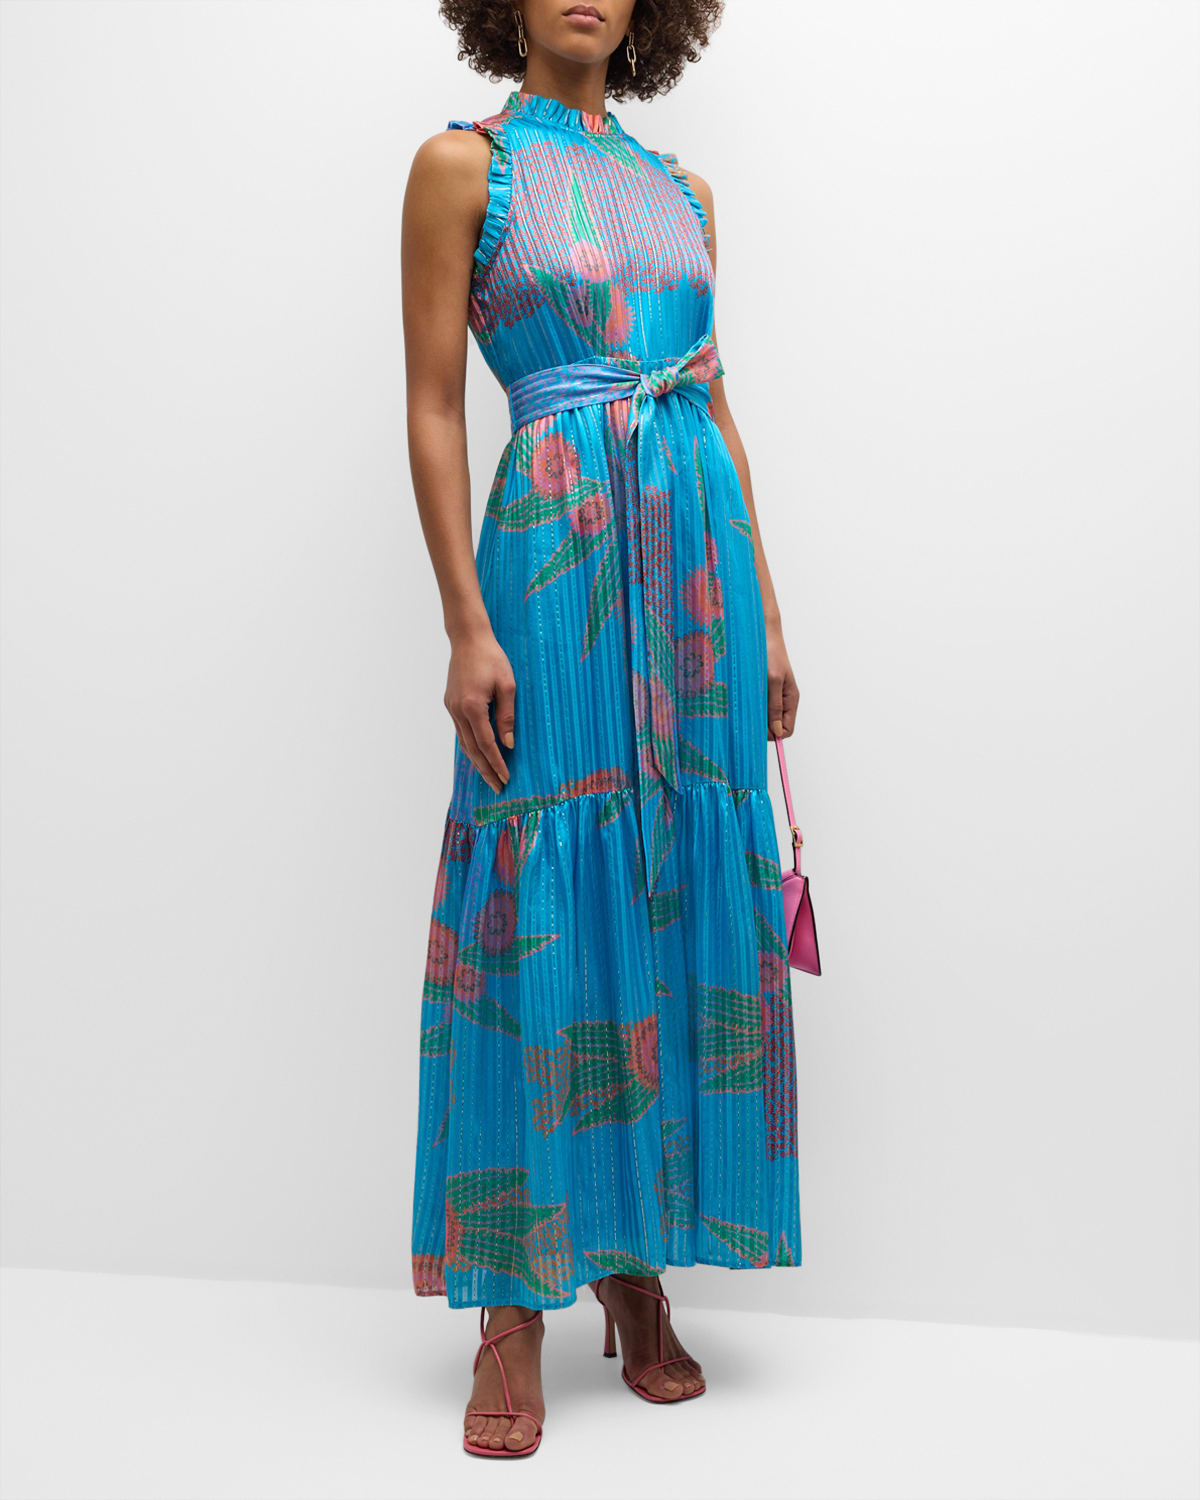 Alice Floral Print Maxi Dress with Ruffle Trim